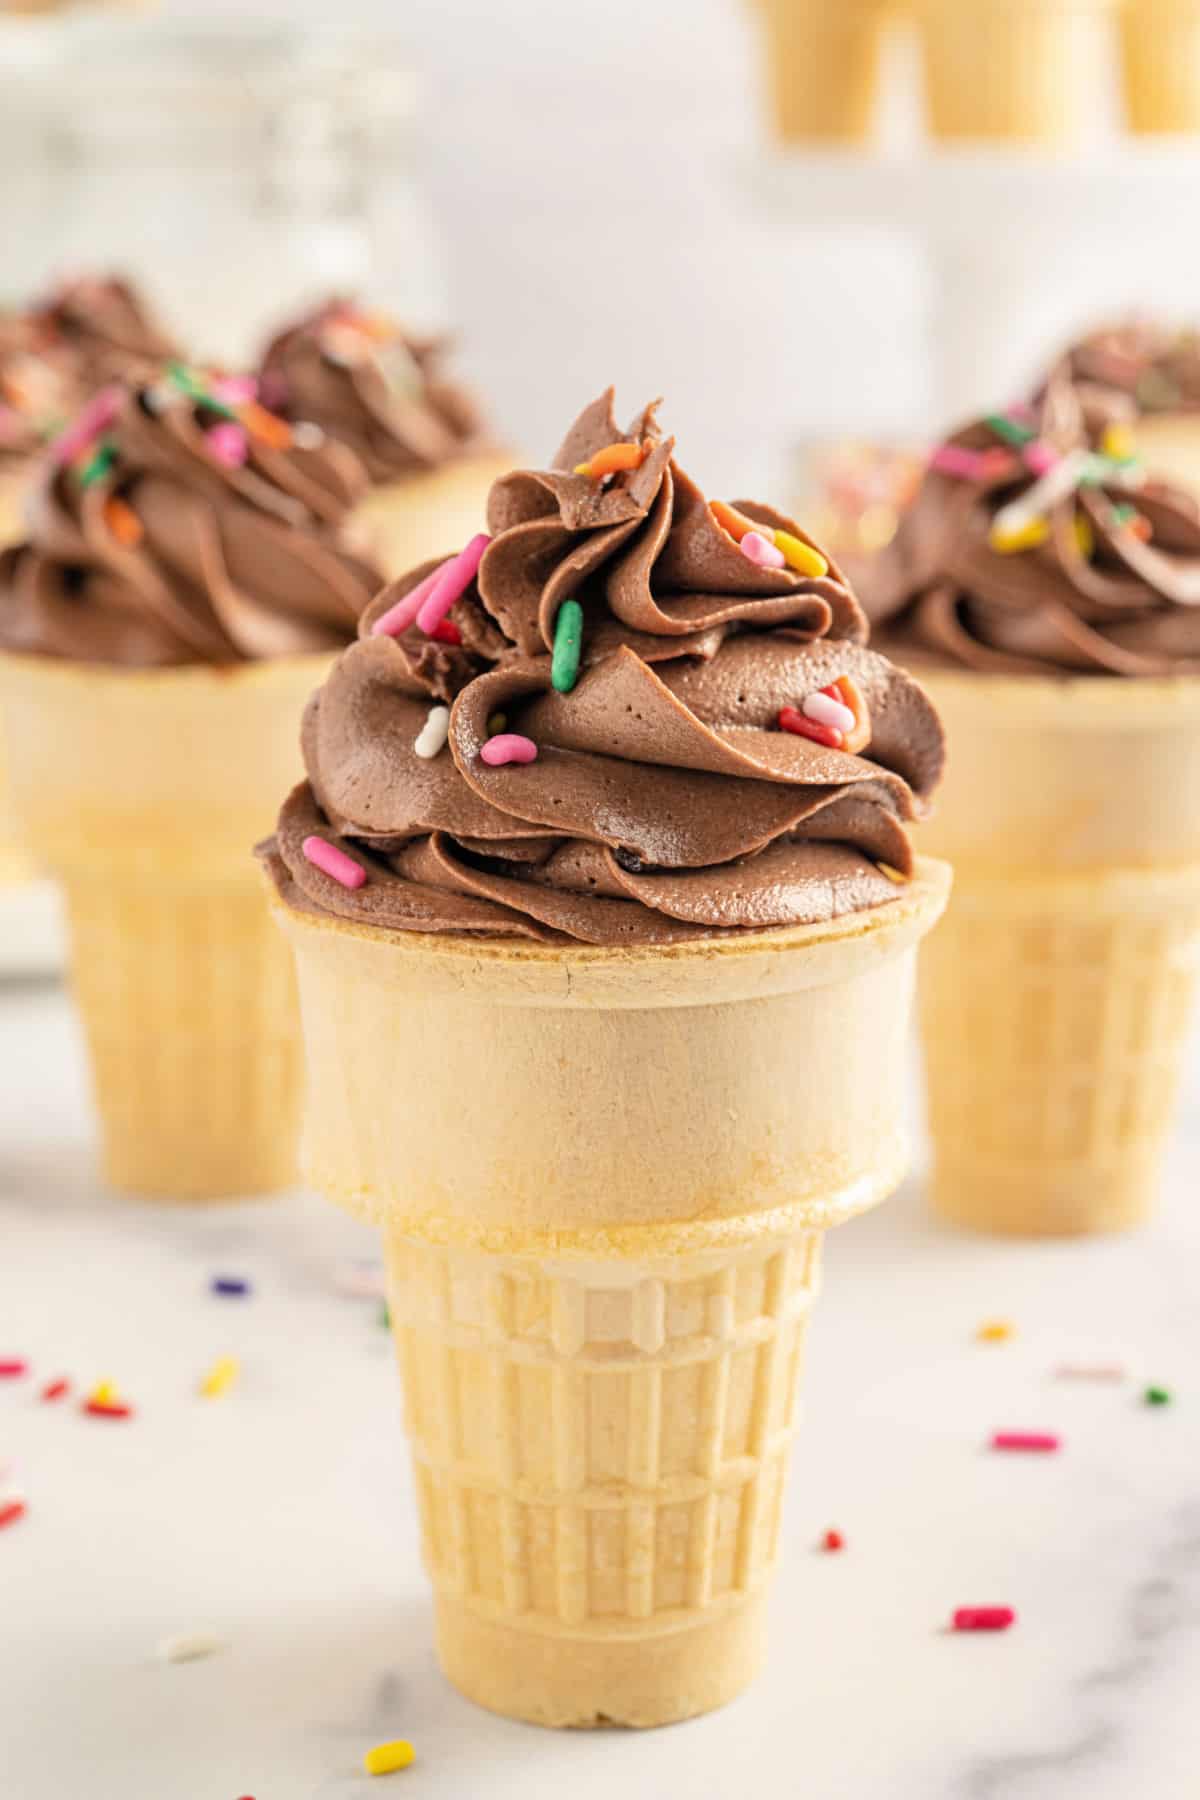 Cupcake baked inside an ice cream cone and topped with chocolate frosting.